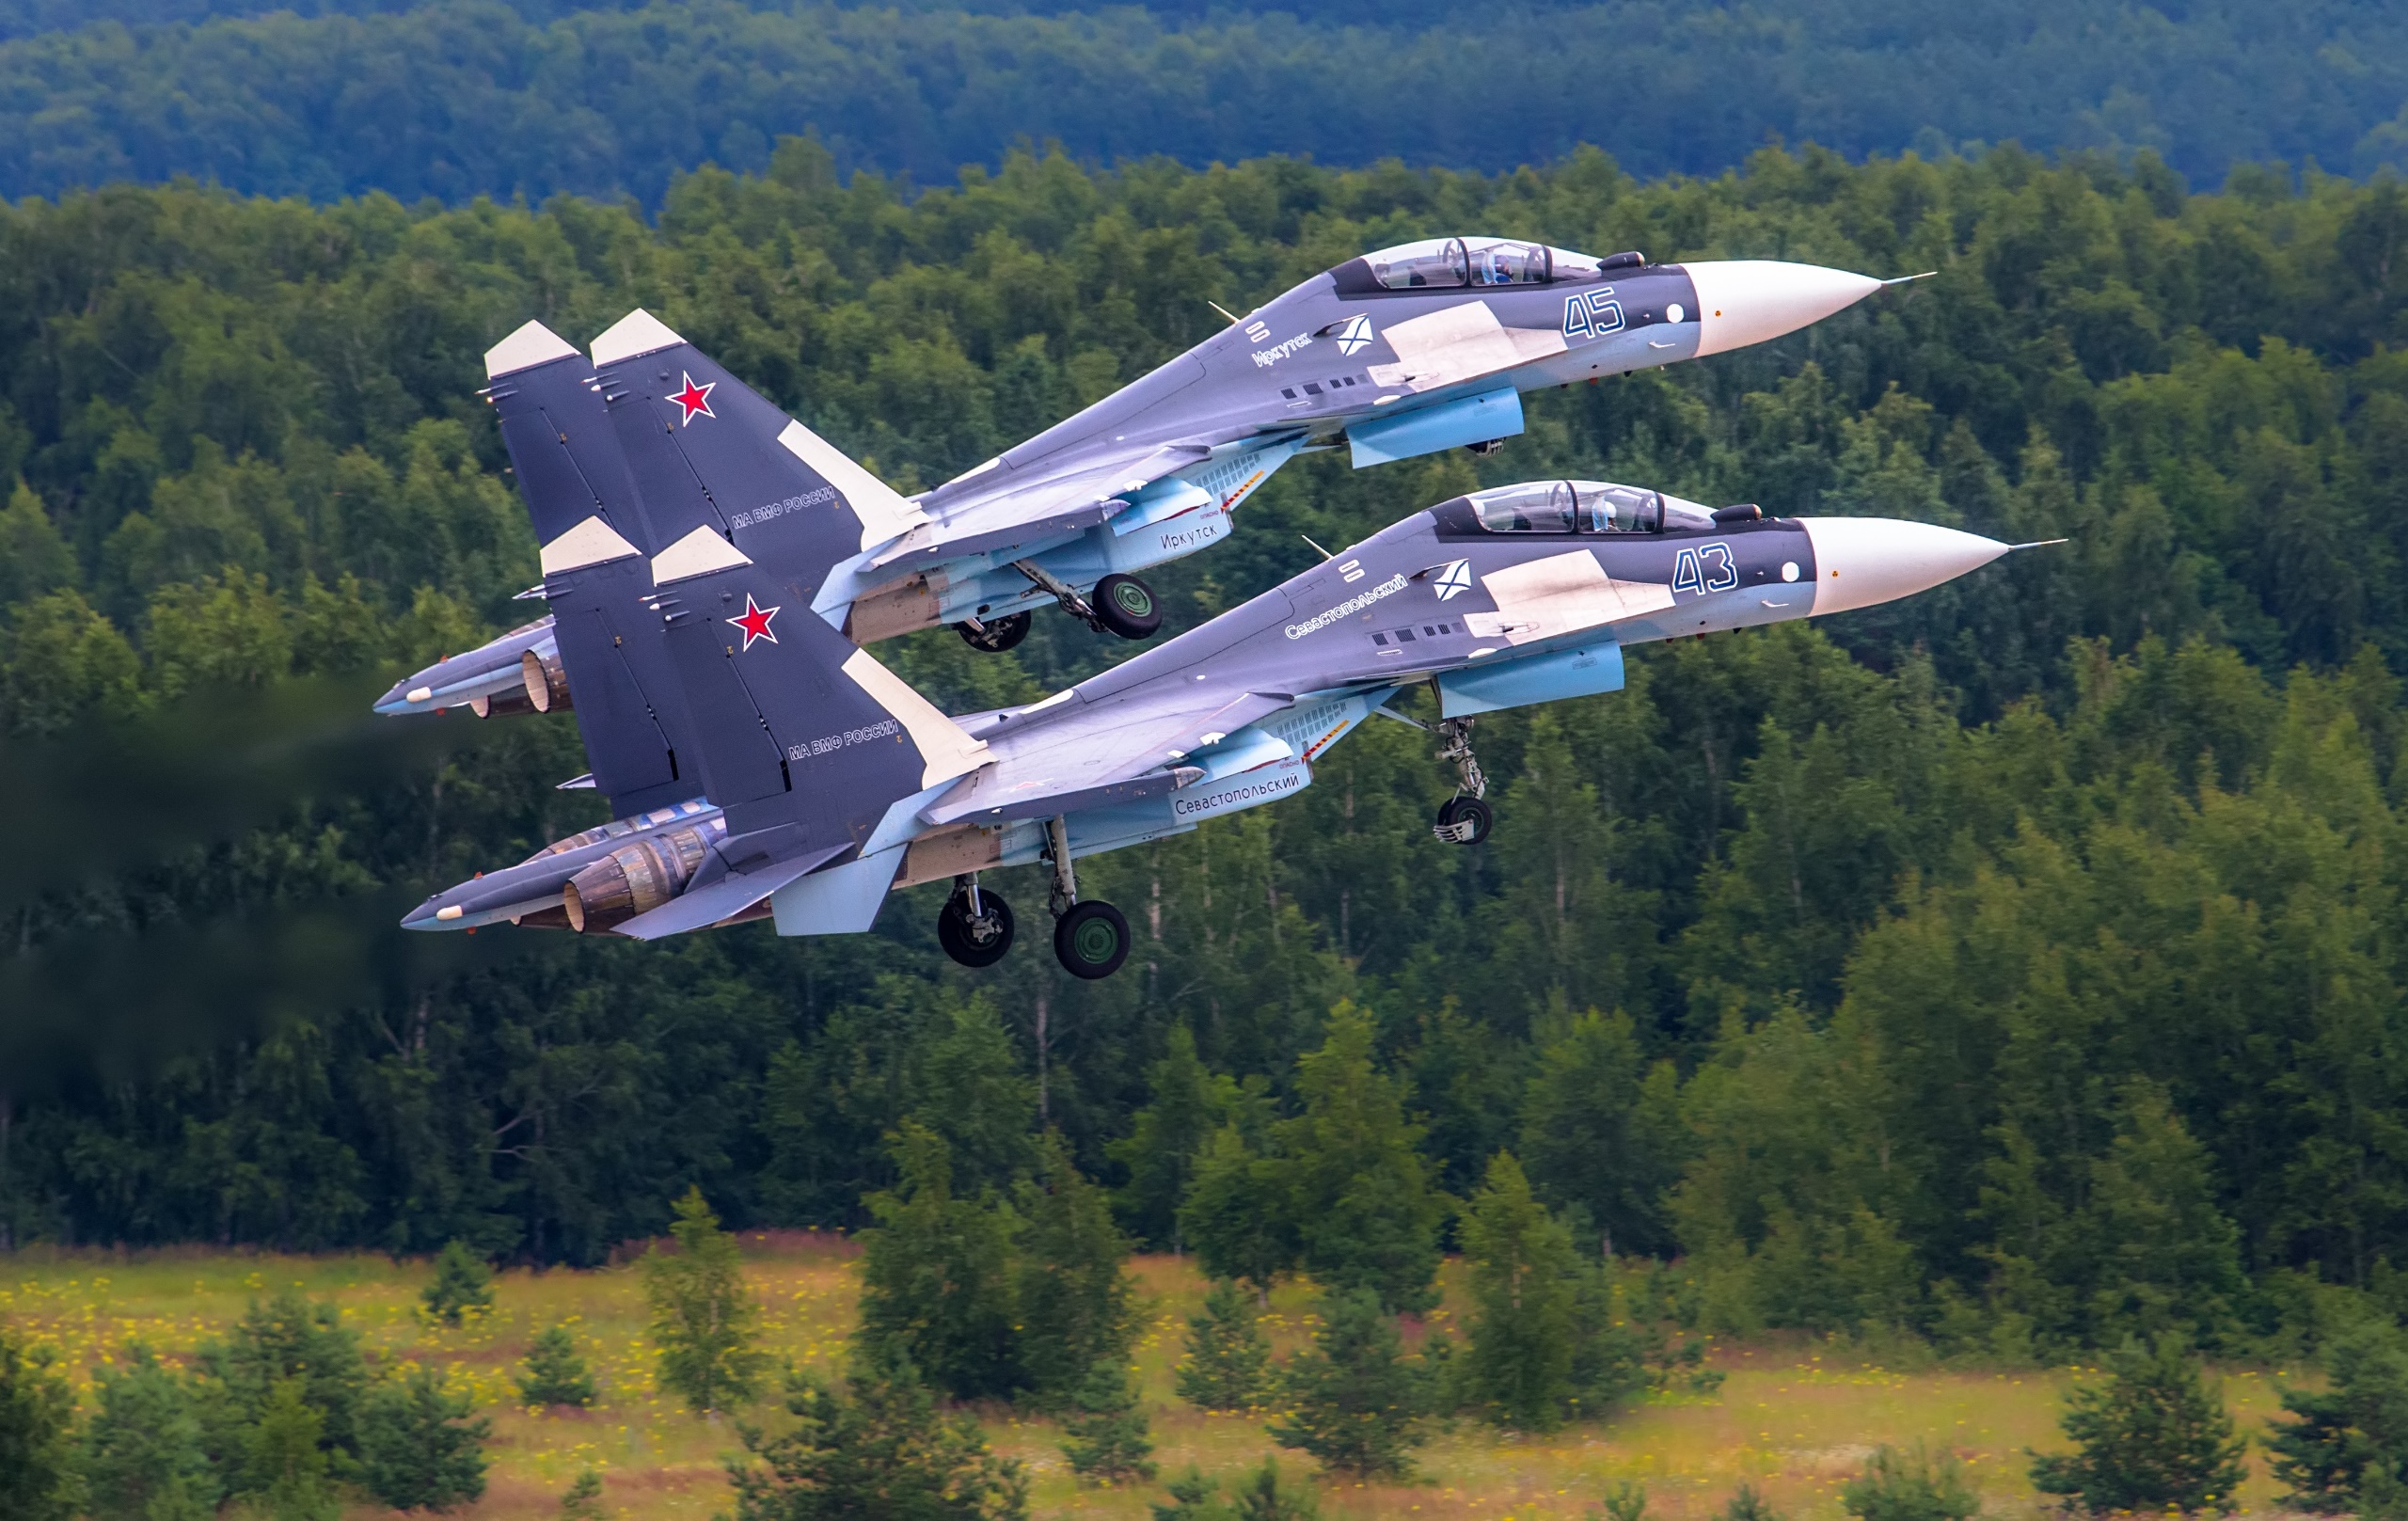 General 2560x1617 purple trees aircraft military military aircraft vehicle Russian Air Force jet fighter Formation take-off Russian/Soviet aircraft Sukhoi Sukhoi Su-30